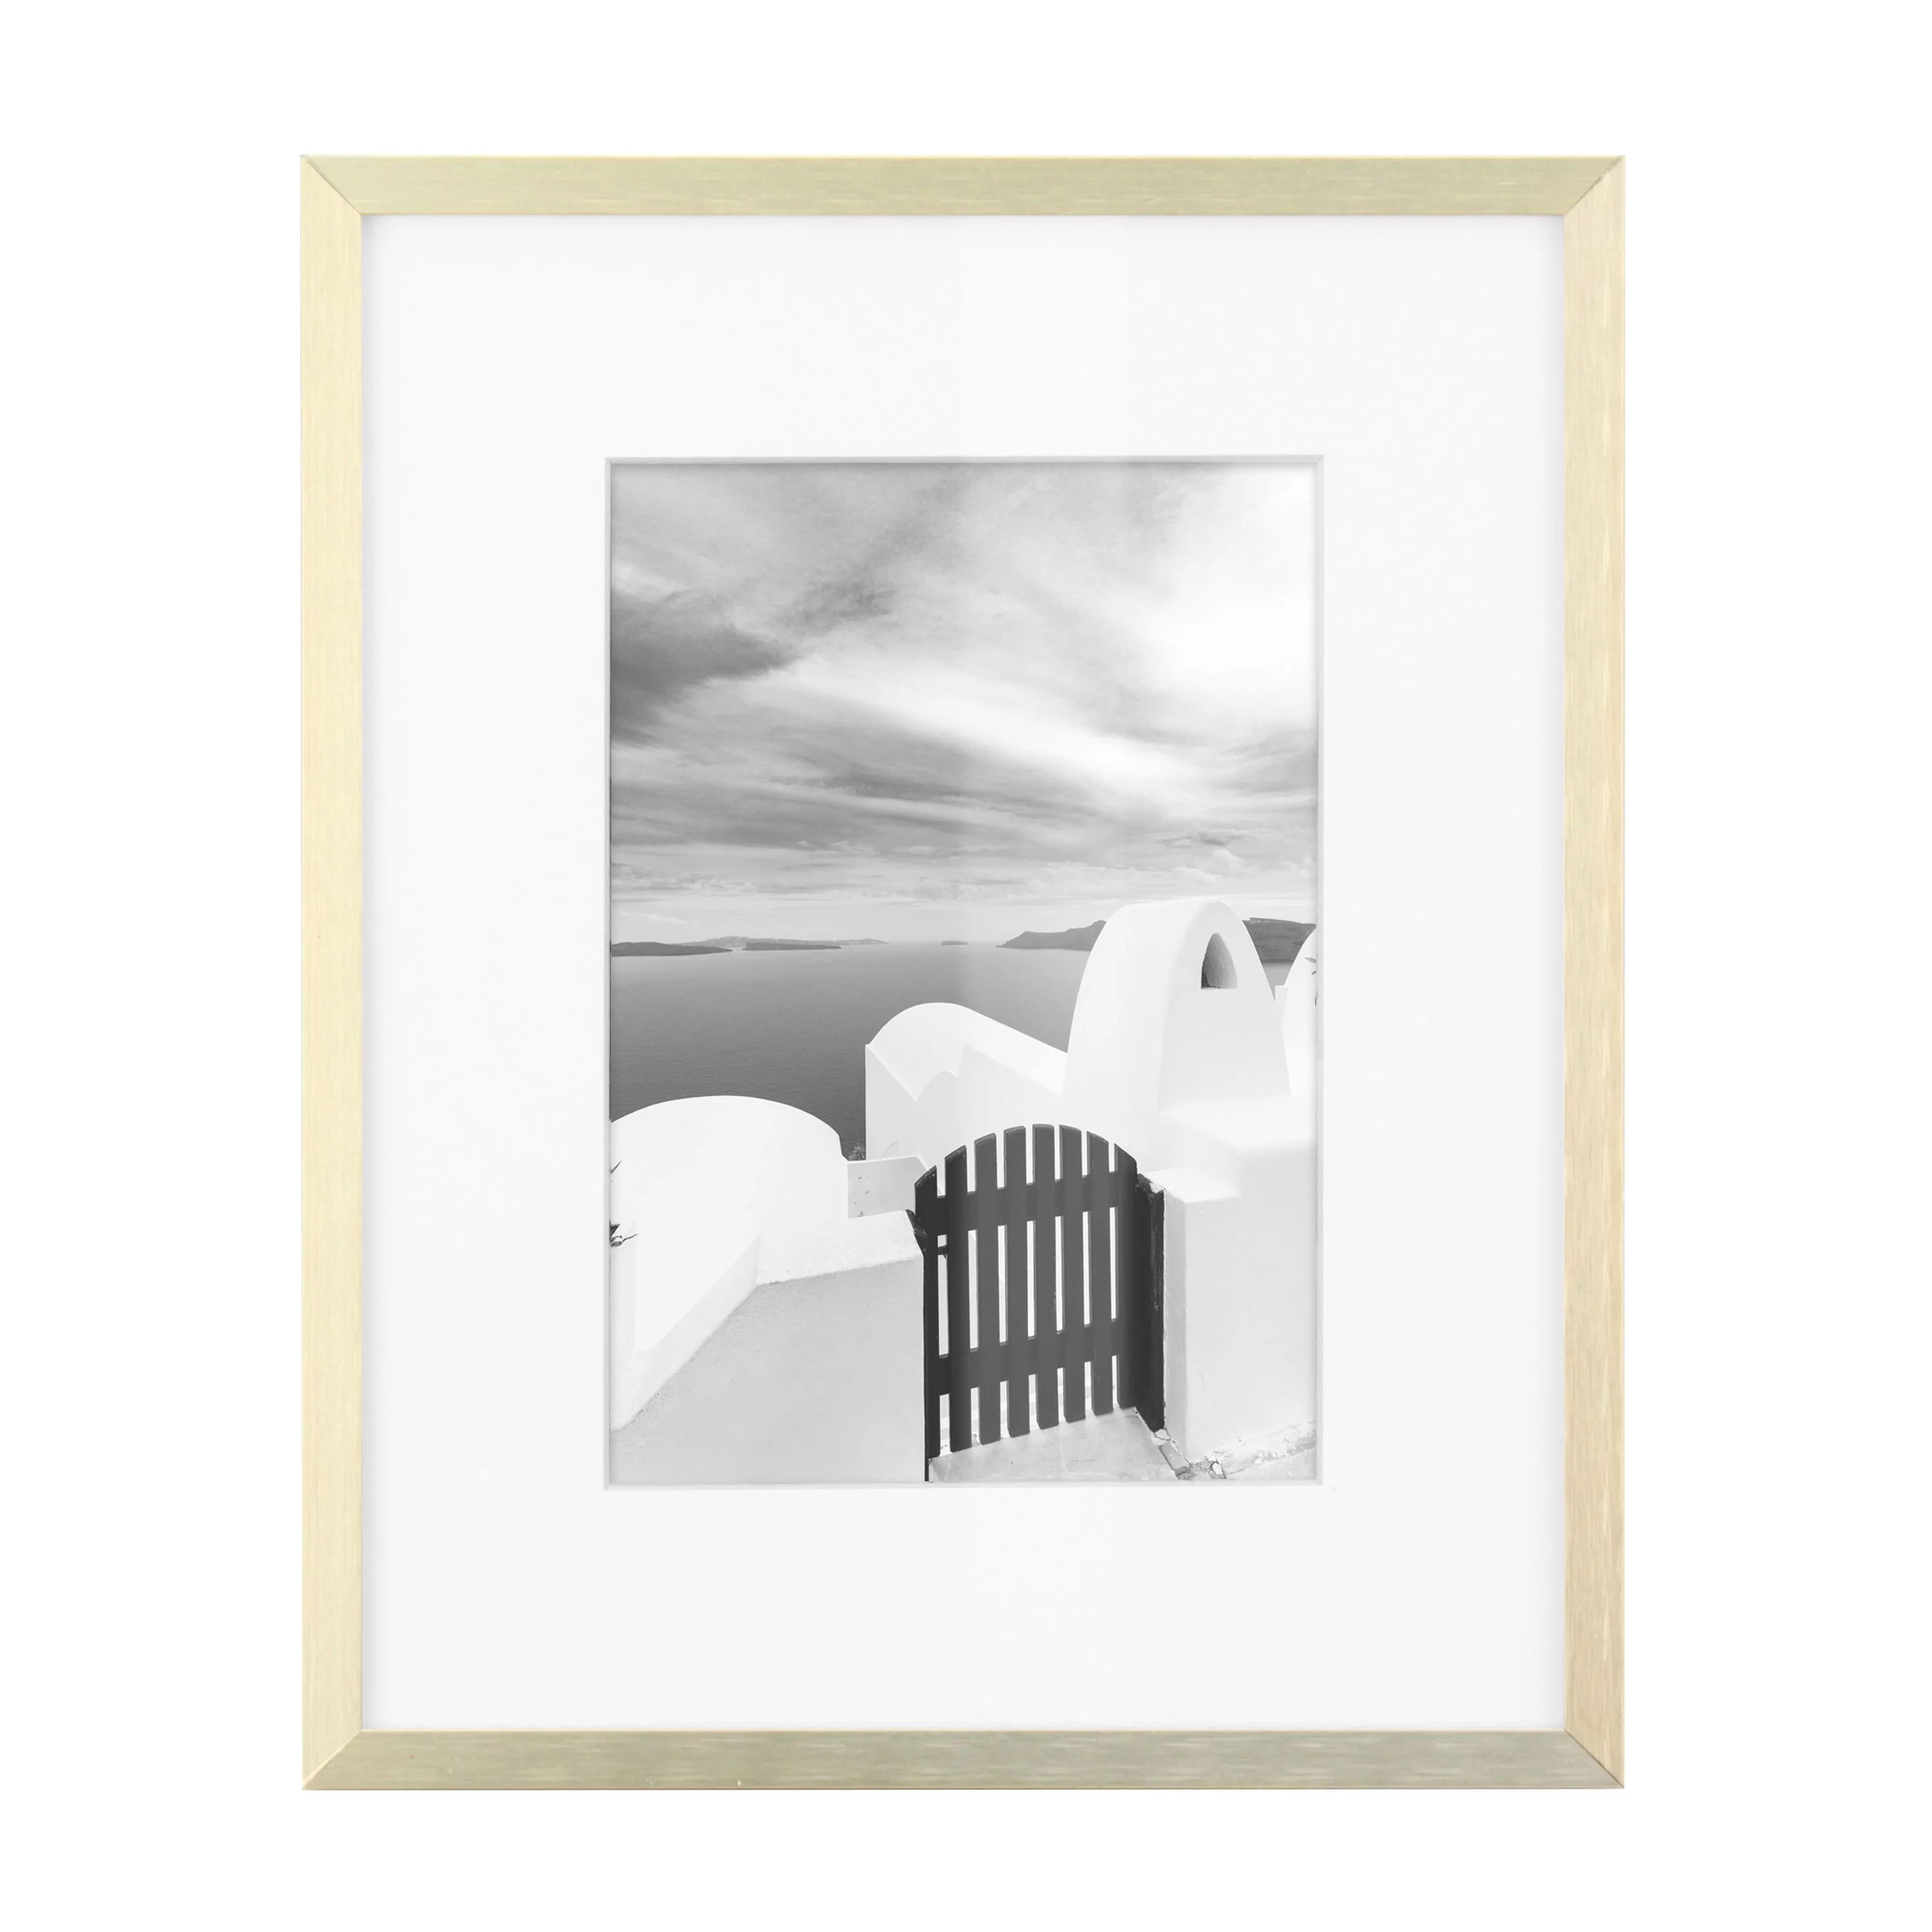 Better Homes & Gardens 8" x 10" Matted to 5" x 7" Rectangle Metal Tabletop Picture Frame, Gold | Walmart (US)